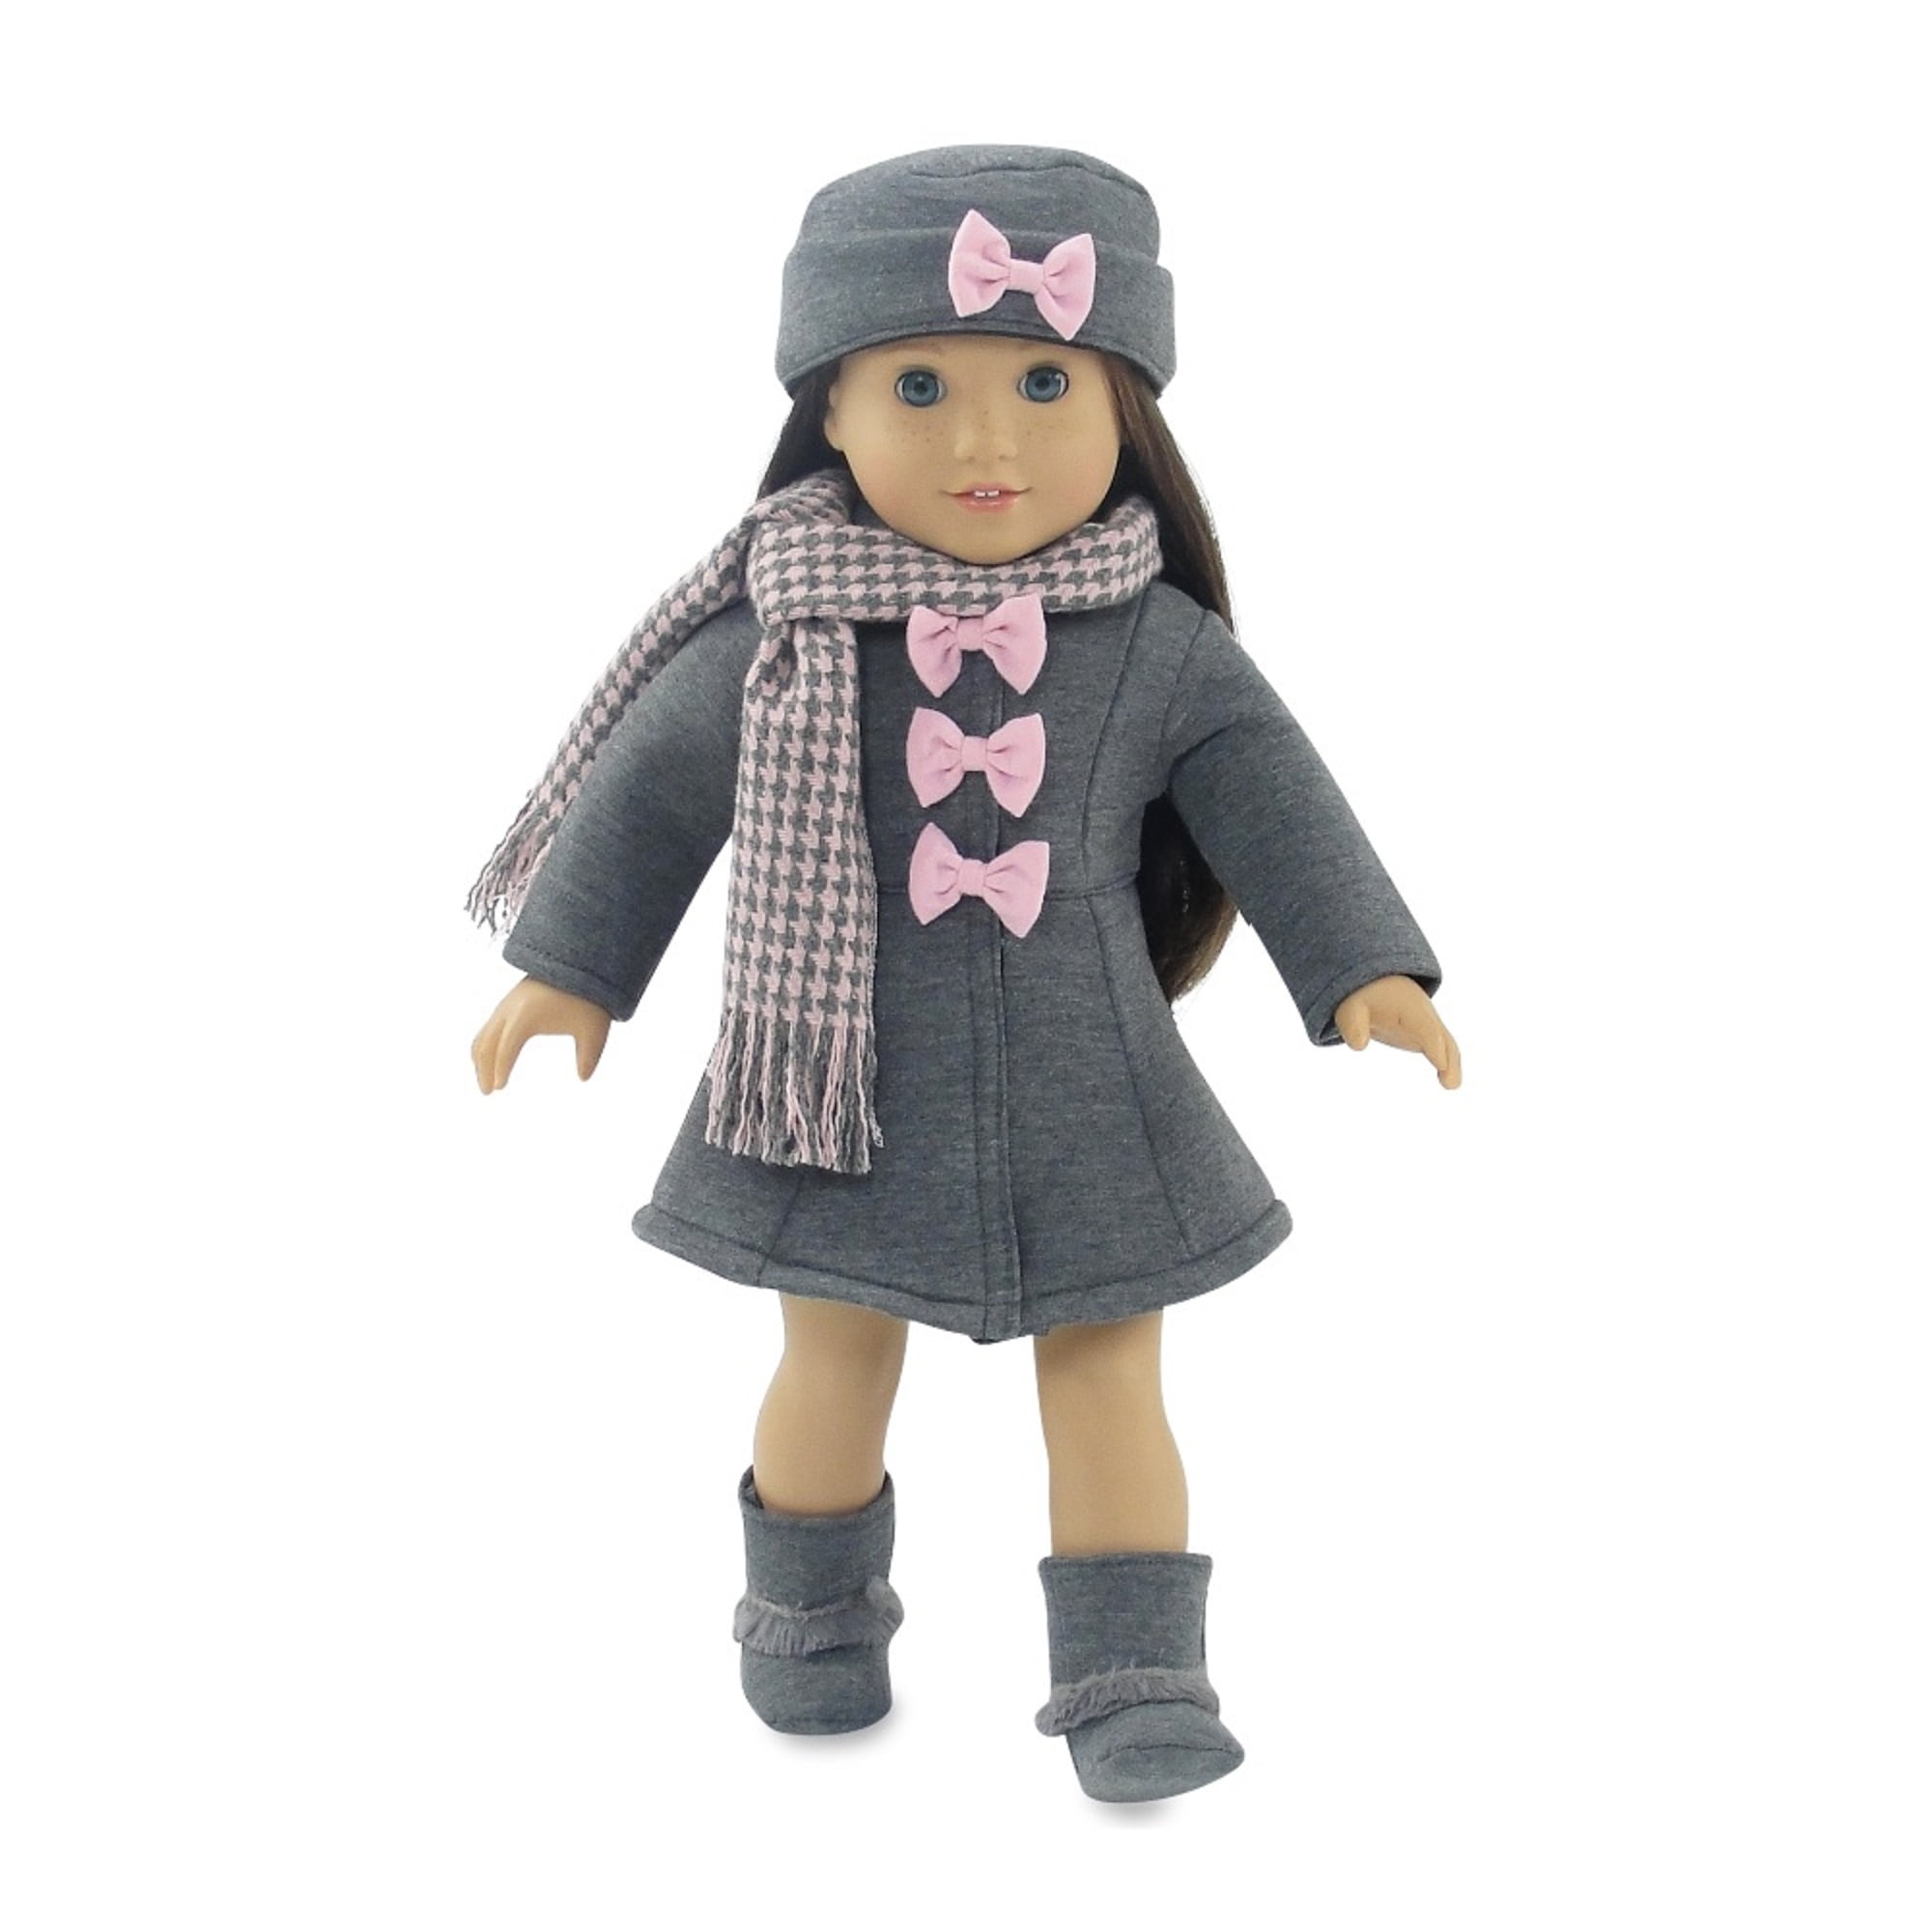 Pink Print Knit Boot Shoes w/Pom Poms fits 18" American Girl Doll Clothes